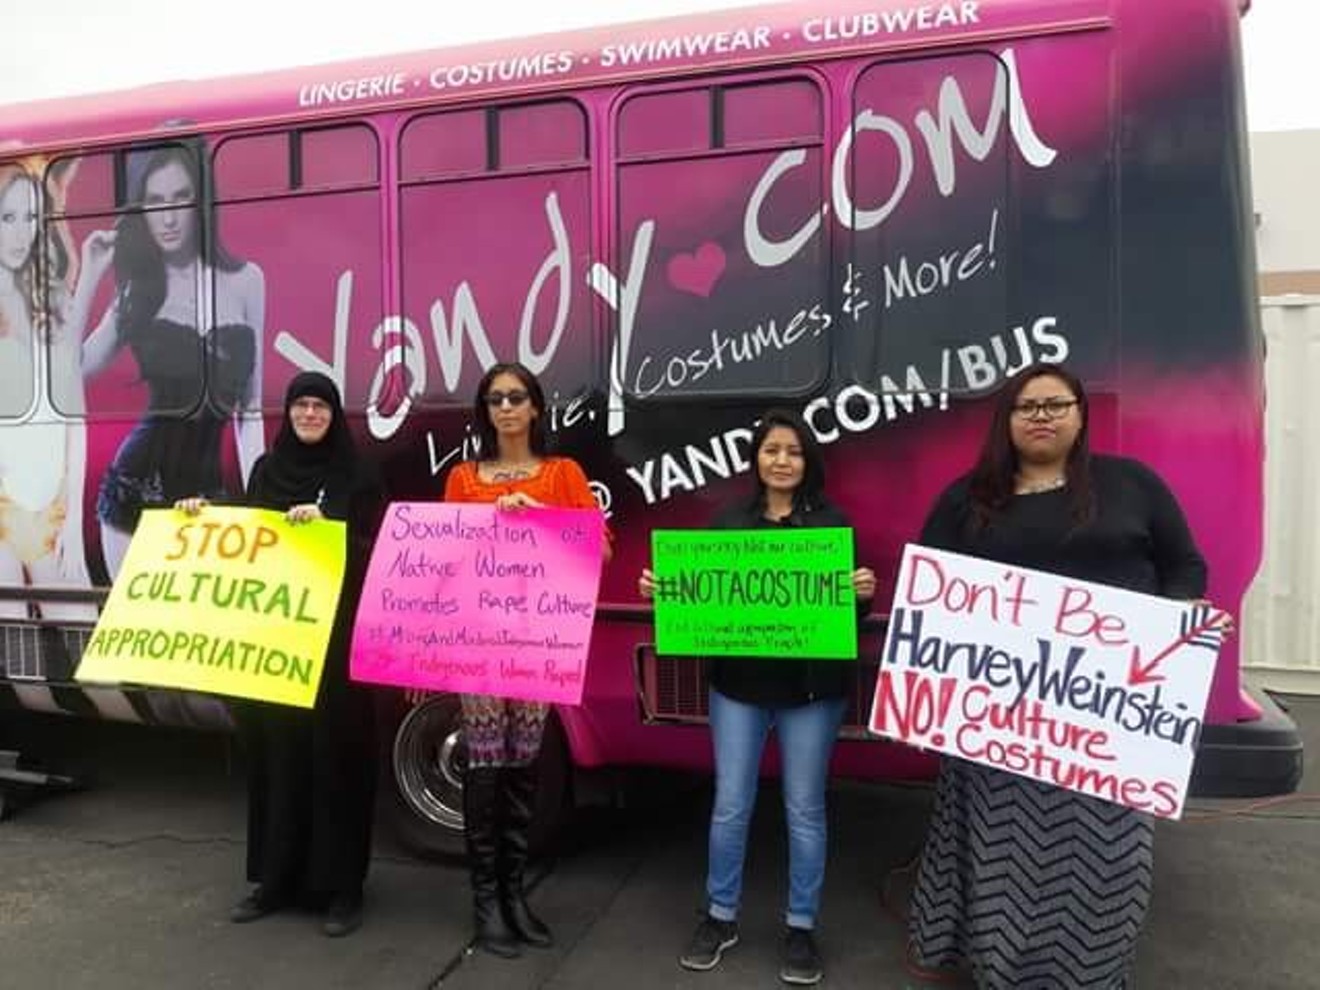 A small but loud group protested cultural appropriation at the Yandy offices until police were called on Monday, October 30.